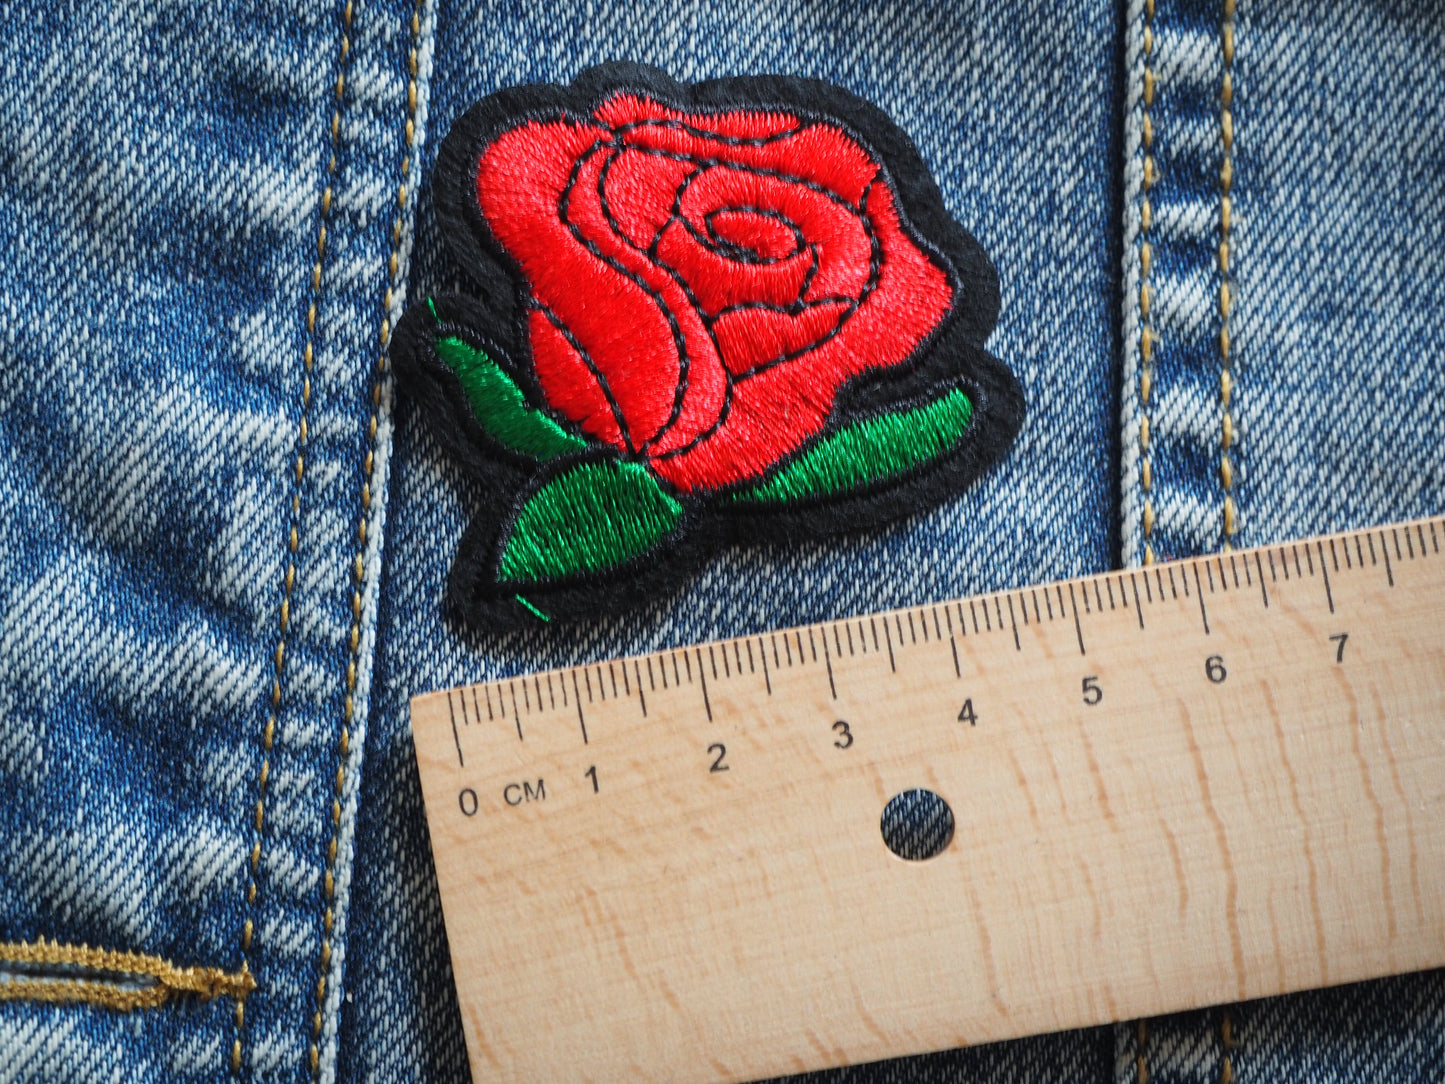 Gothic Rose Patch